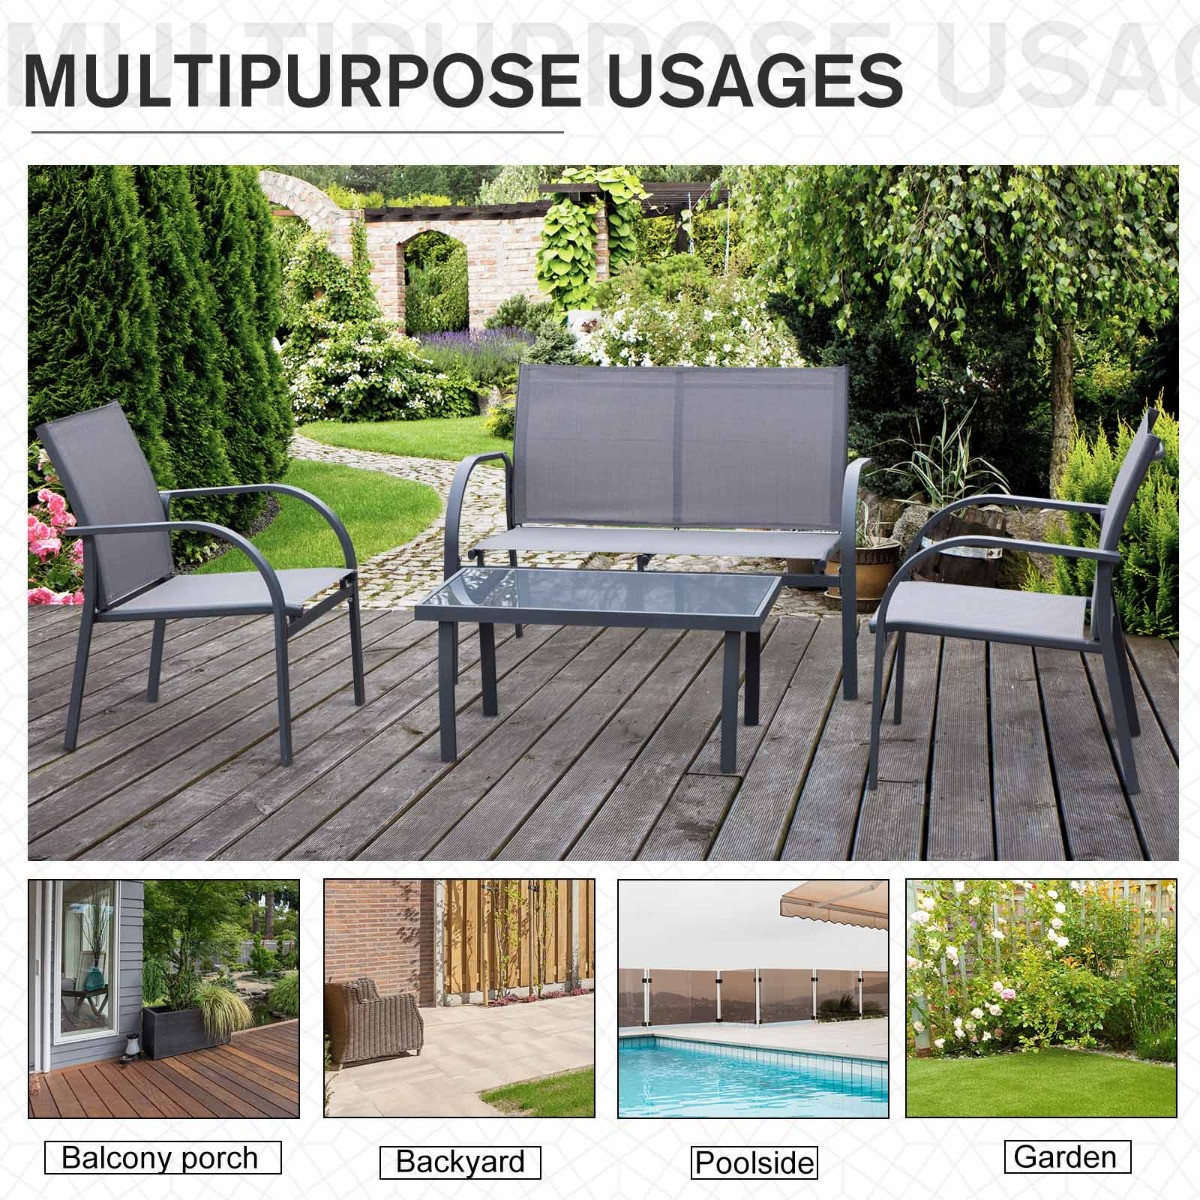 Outsunny Curved Steel Outdoor Furniture Set With Loveseat, 4 Piece - Grey>